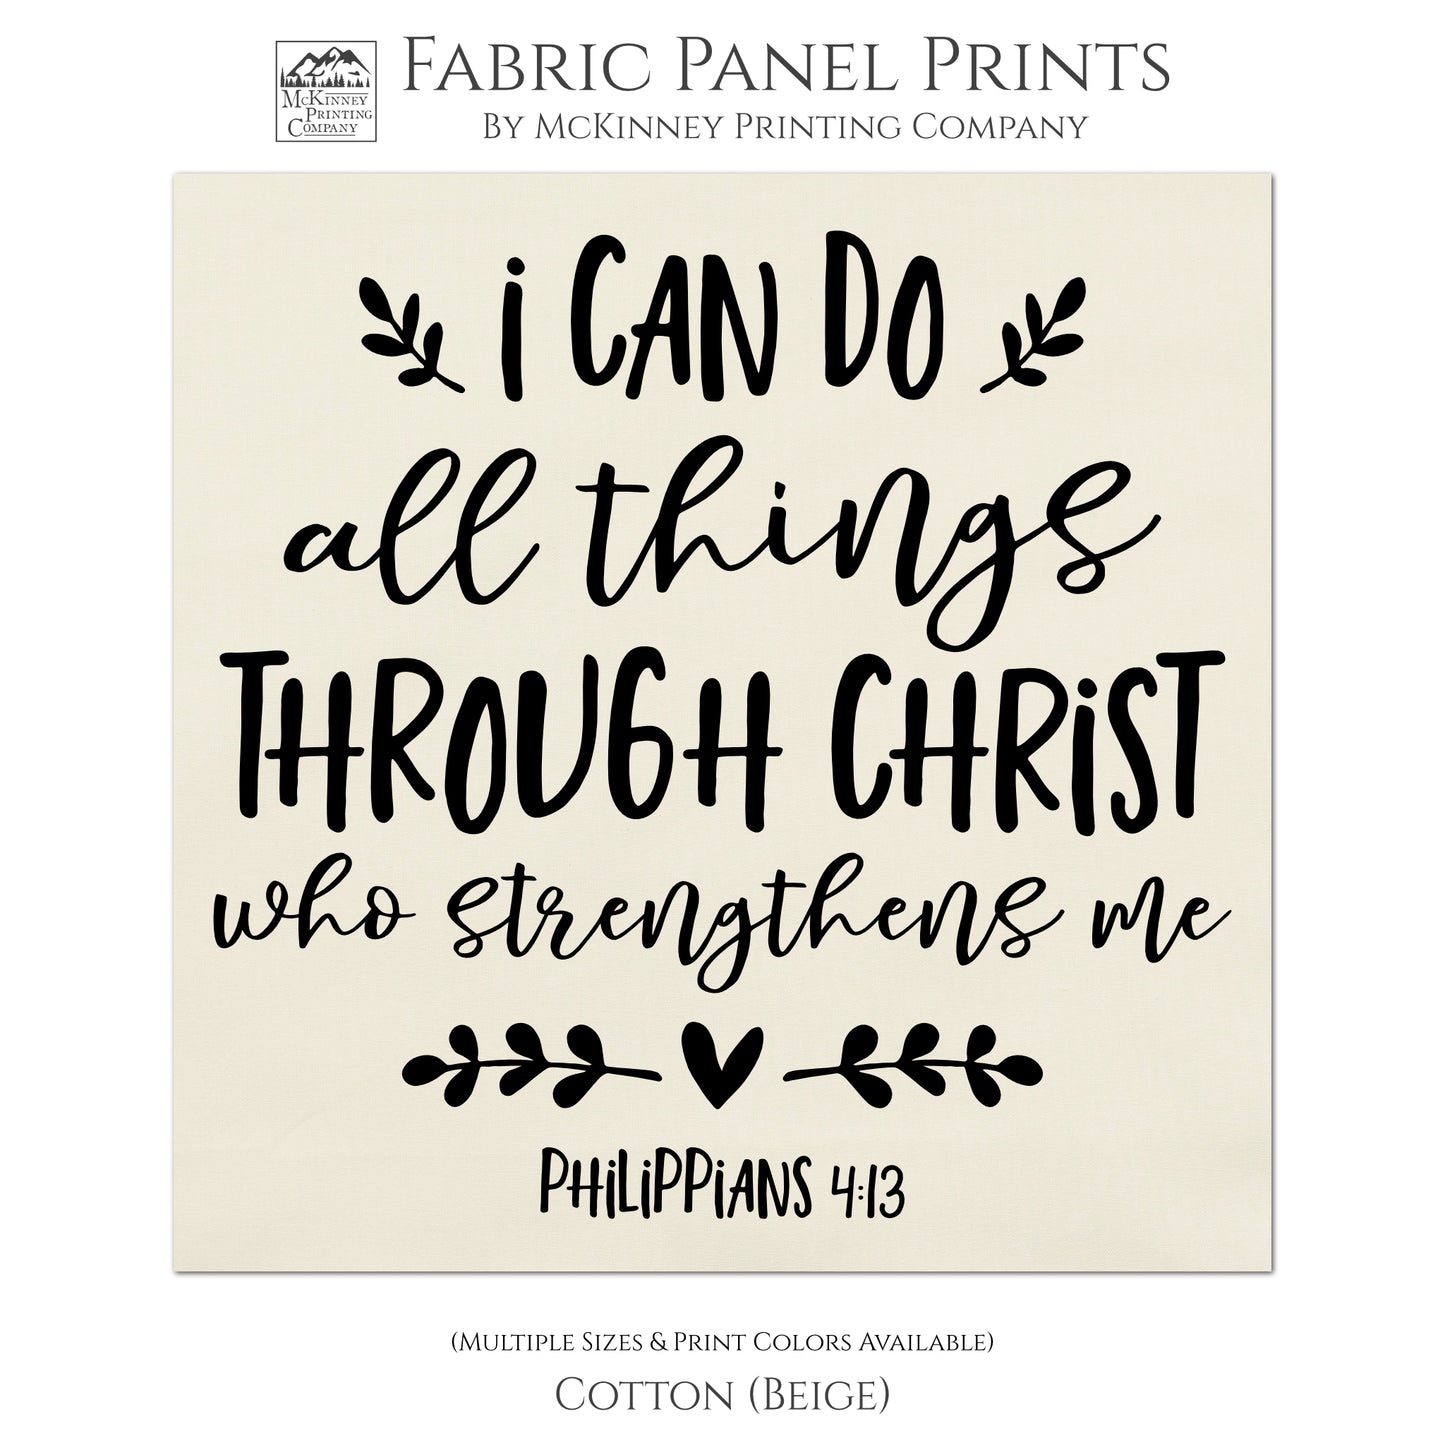 Philippians 4:13 - I can do all things through Christ who strengthens me. Quilt Block, Fabric Panel Print - Cotton